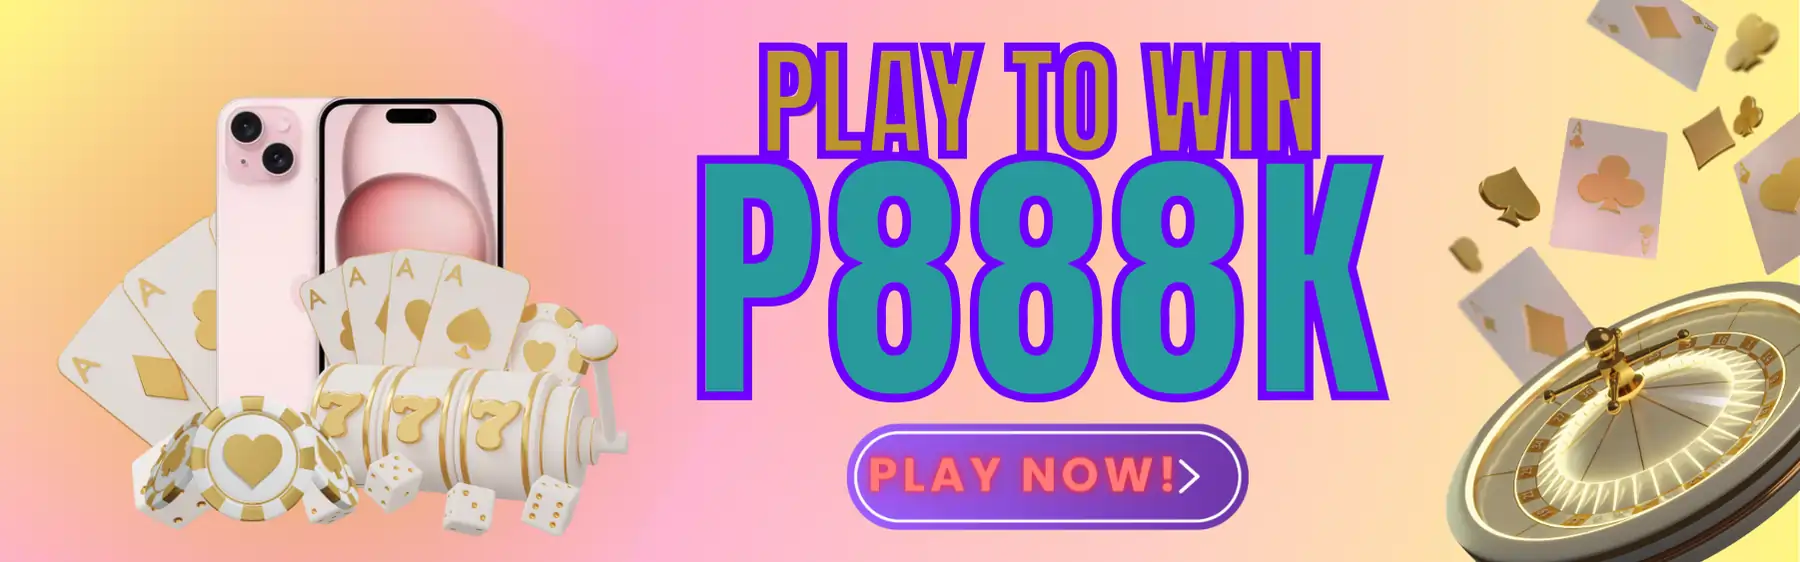 play to win 888k